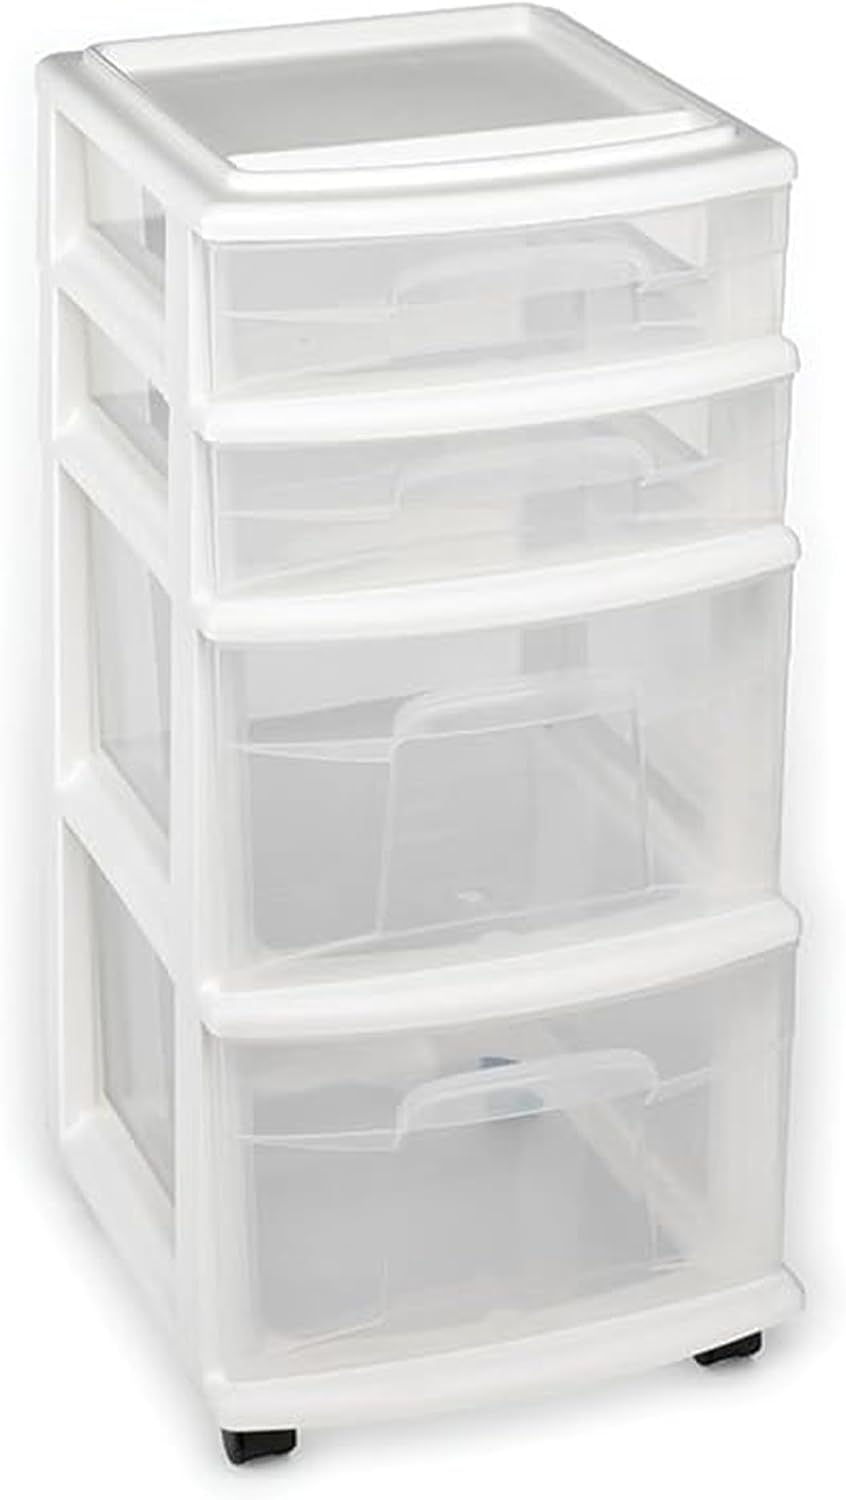 https://bigbigmart.com/wp-content/uploads/2023/09/Homz-Clear-Plastic-4-Drawer-Medium-Home-Organization-Storage-Container-Tower-w-2-Large-and-2-Small-Drawers-and-Removeable-Caster-Wheels-White-Frame.jpg